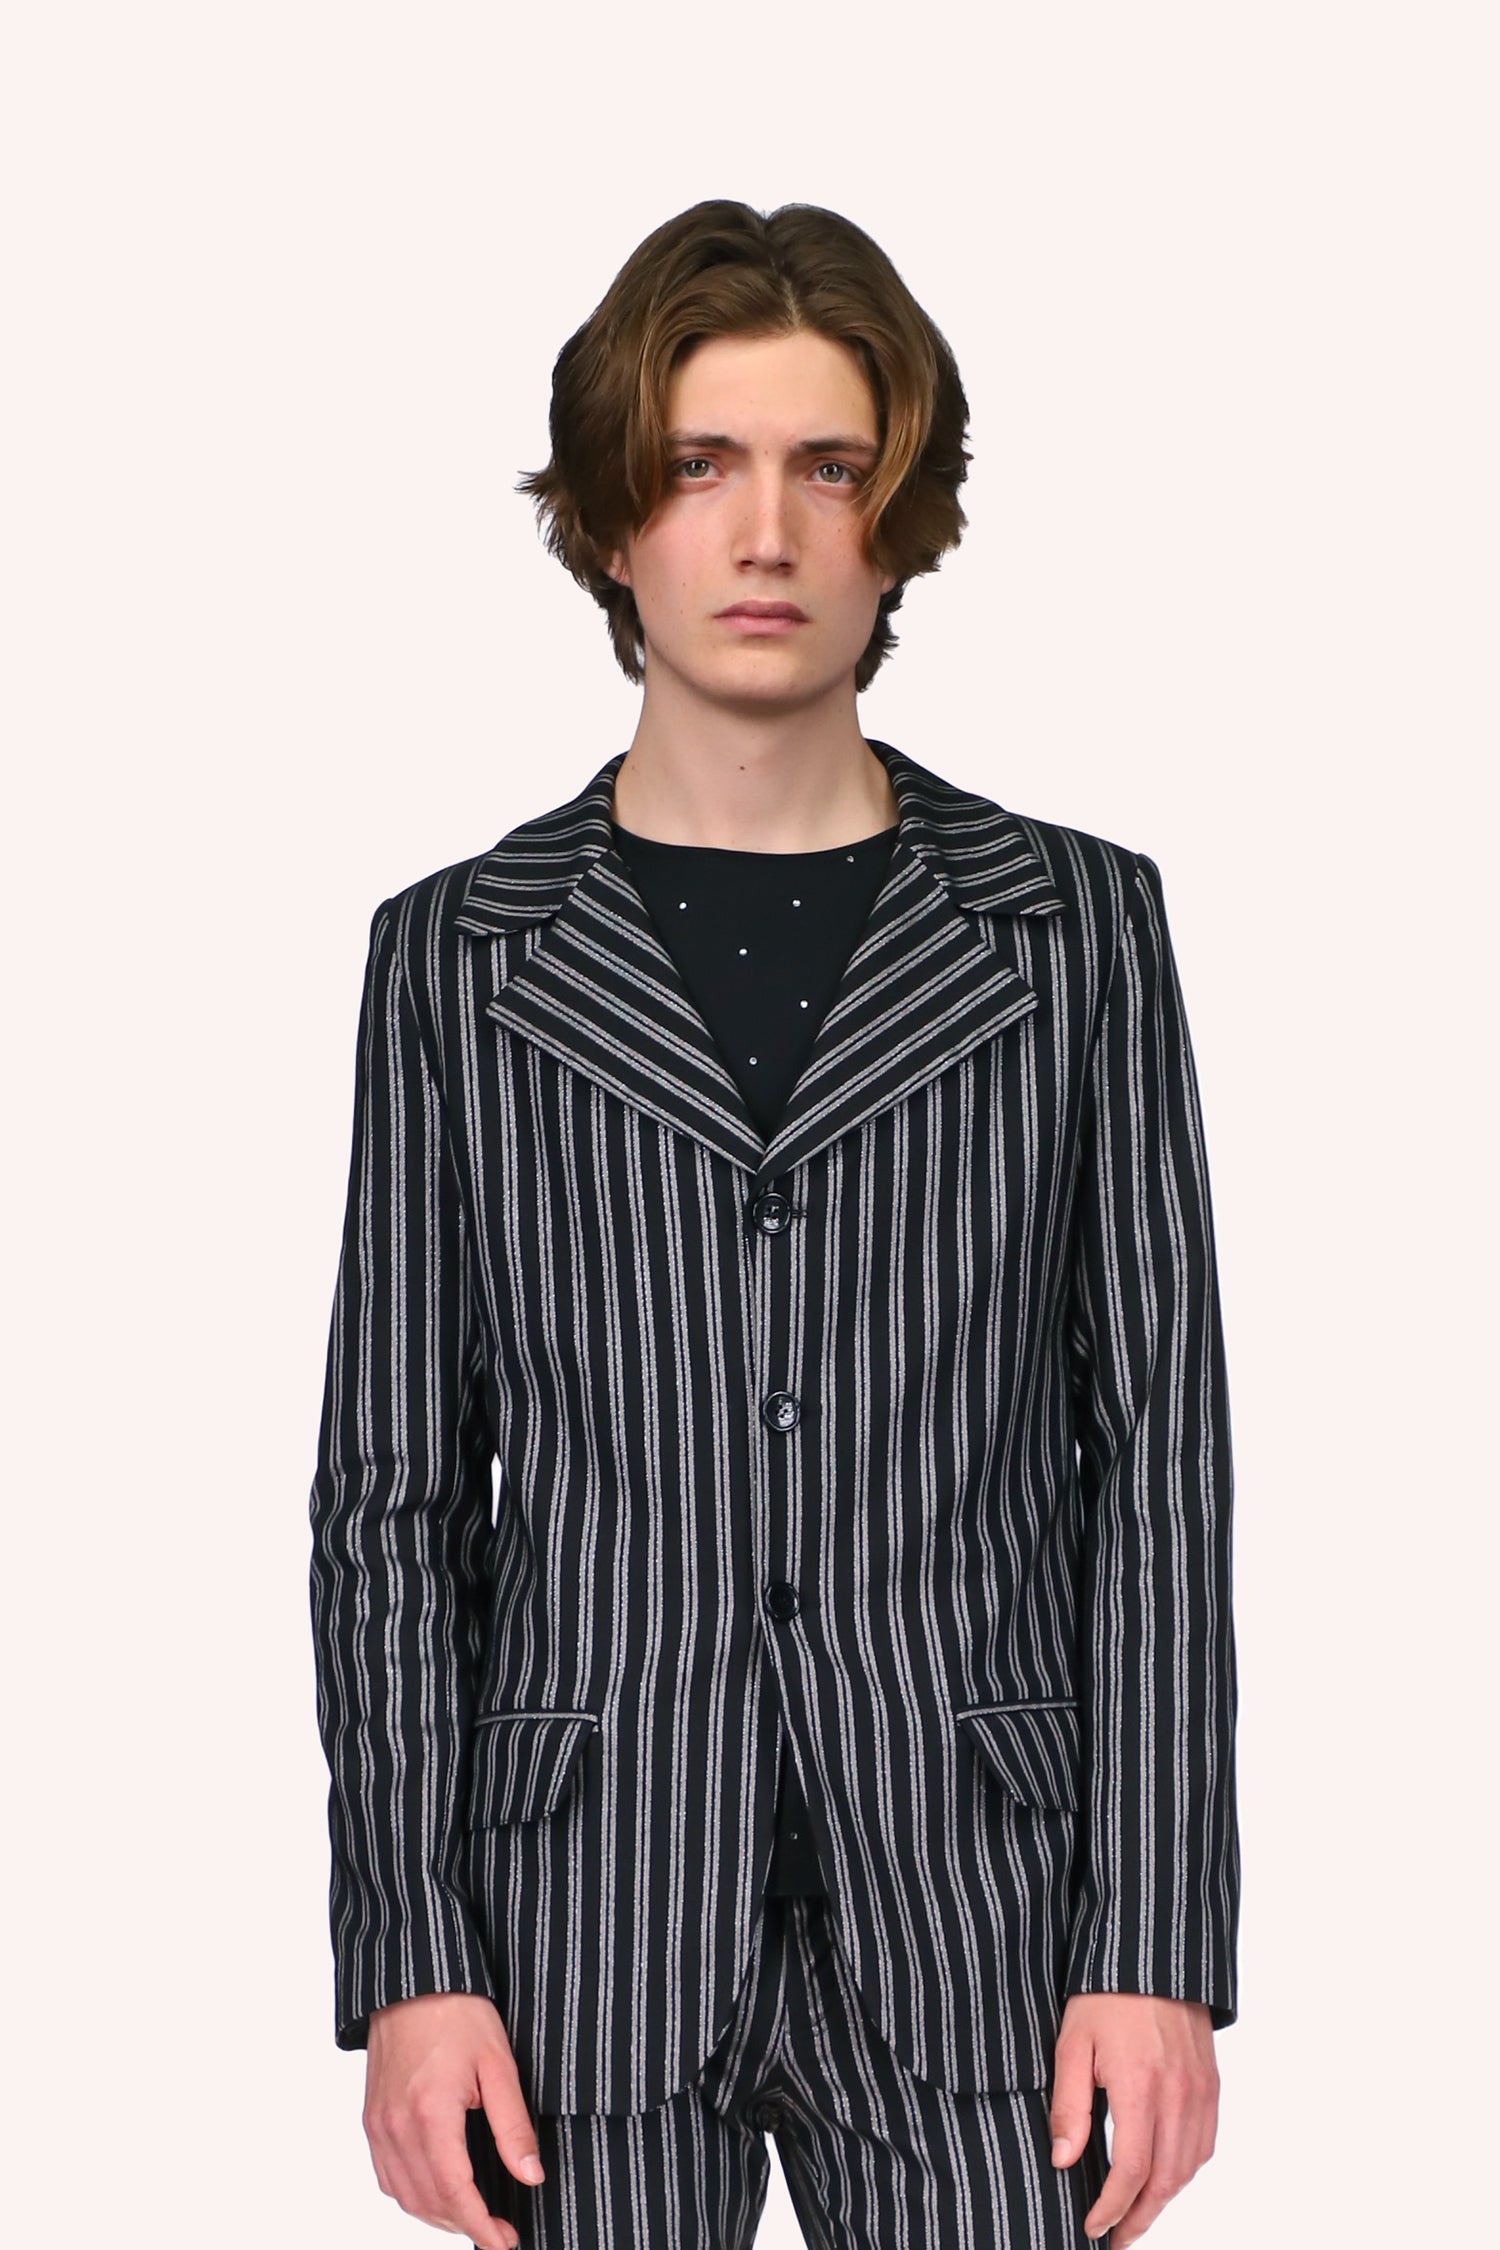 Pinstripe Jacket Black, long sleeves, large V-collar, 2 pockets, long black and white stripes down, 3 buttons